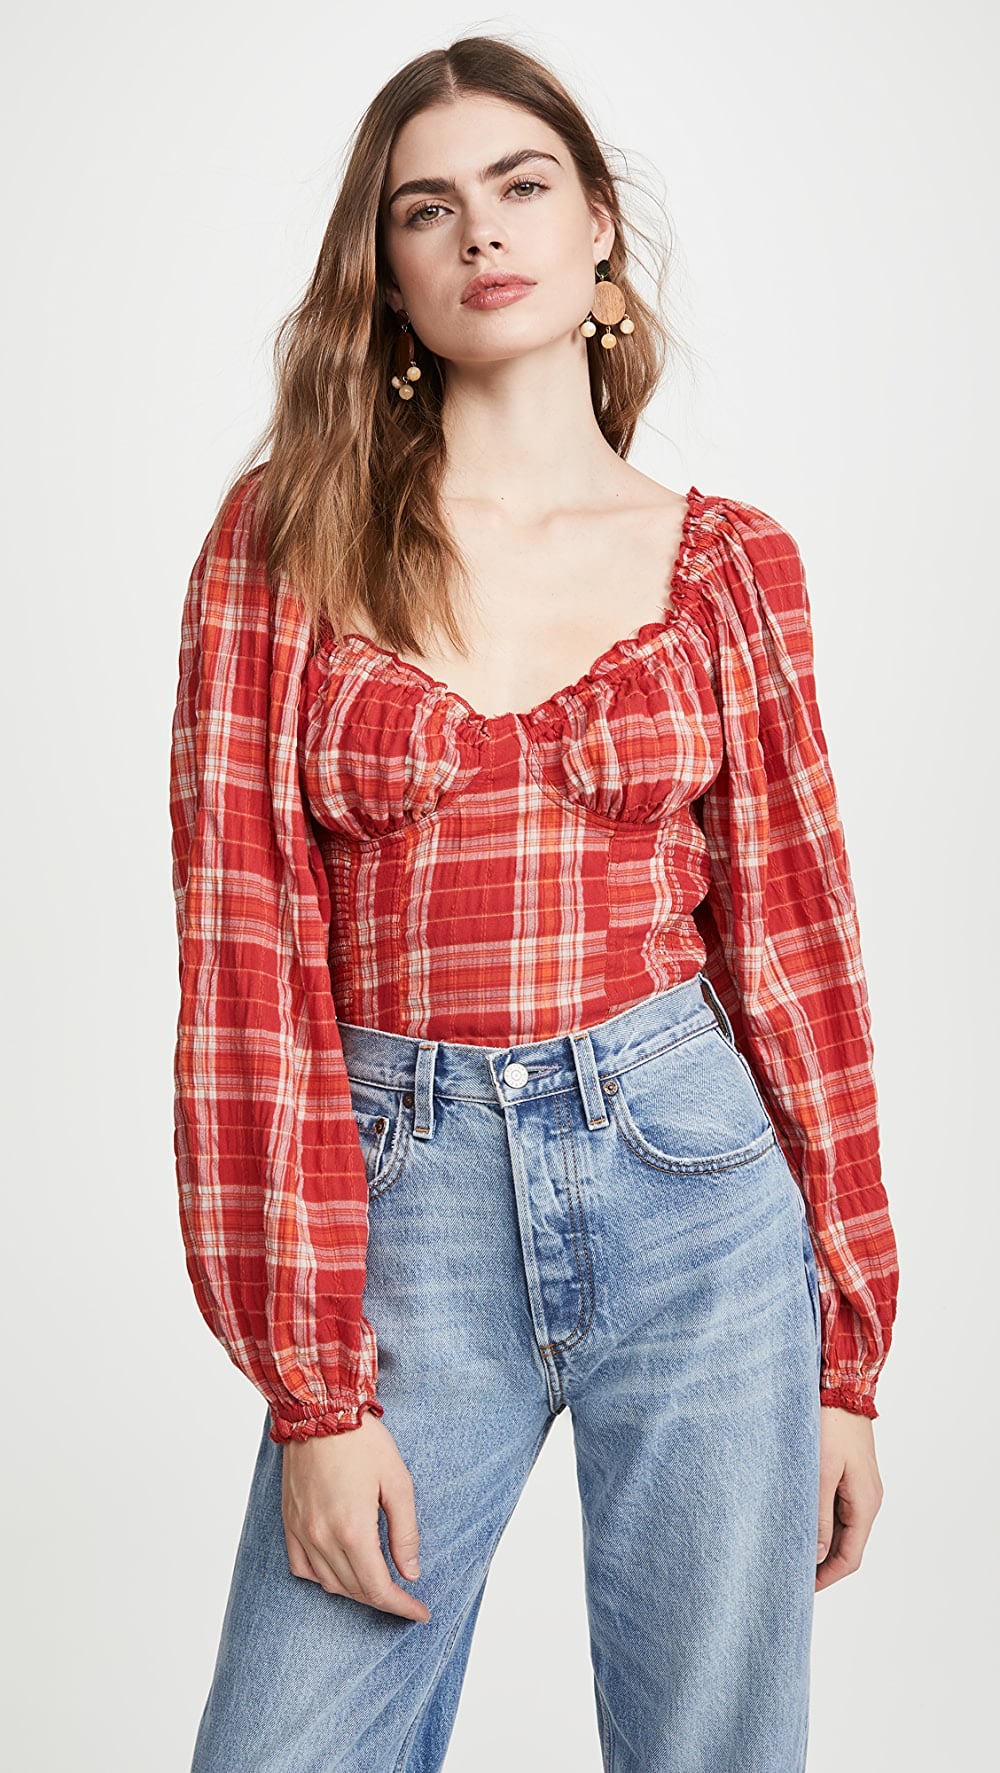 Free People Cherry Bomb Plaid Top Yes, You Can Buy These 29 Spring Arrivals From Shopbop For Under $100 | POPSUGAR Fashion Photo 8